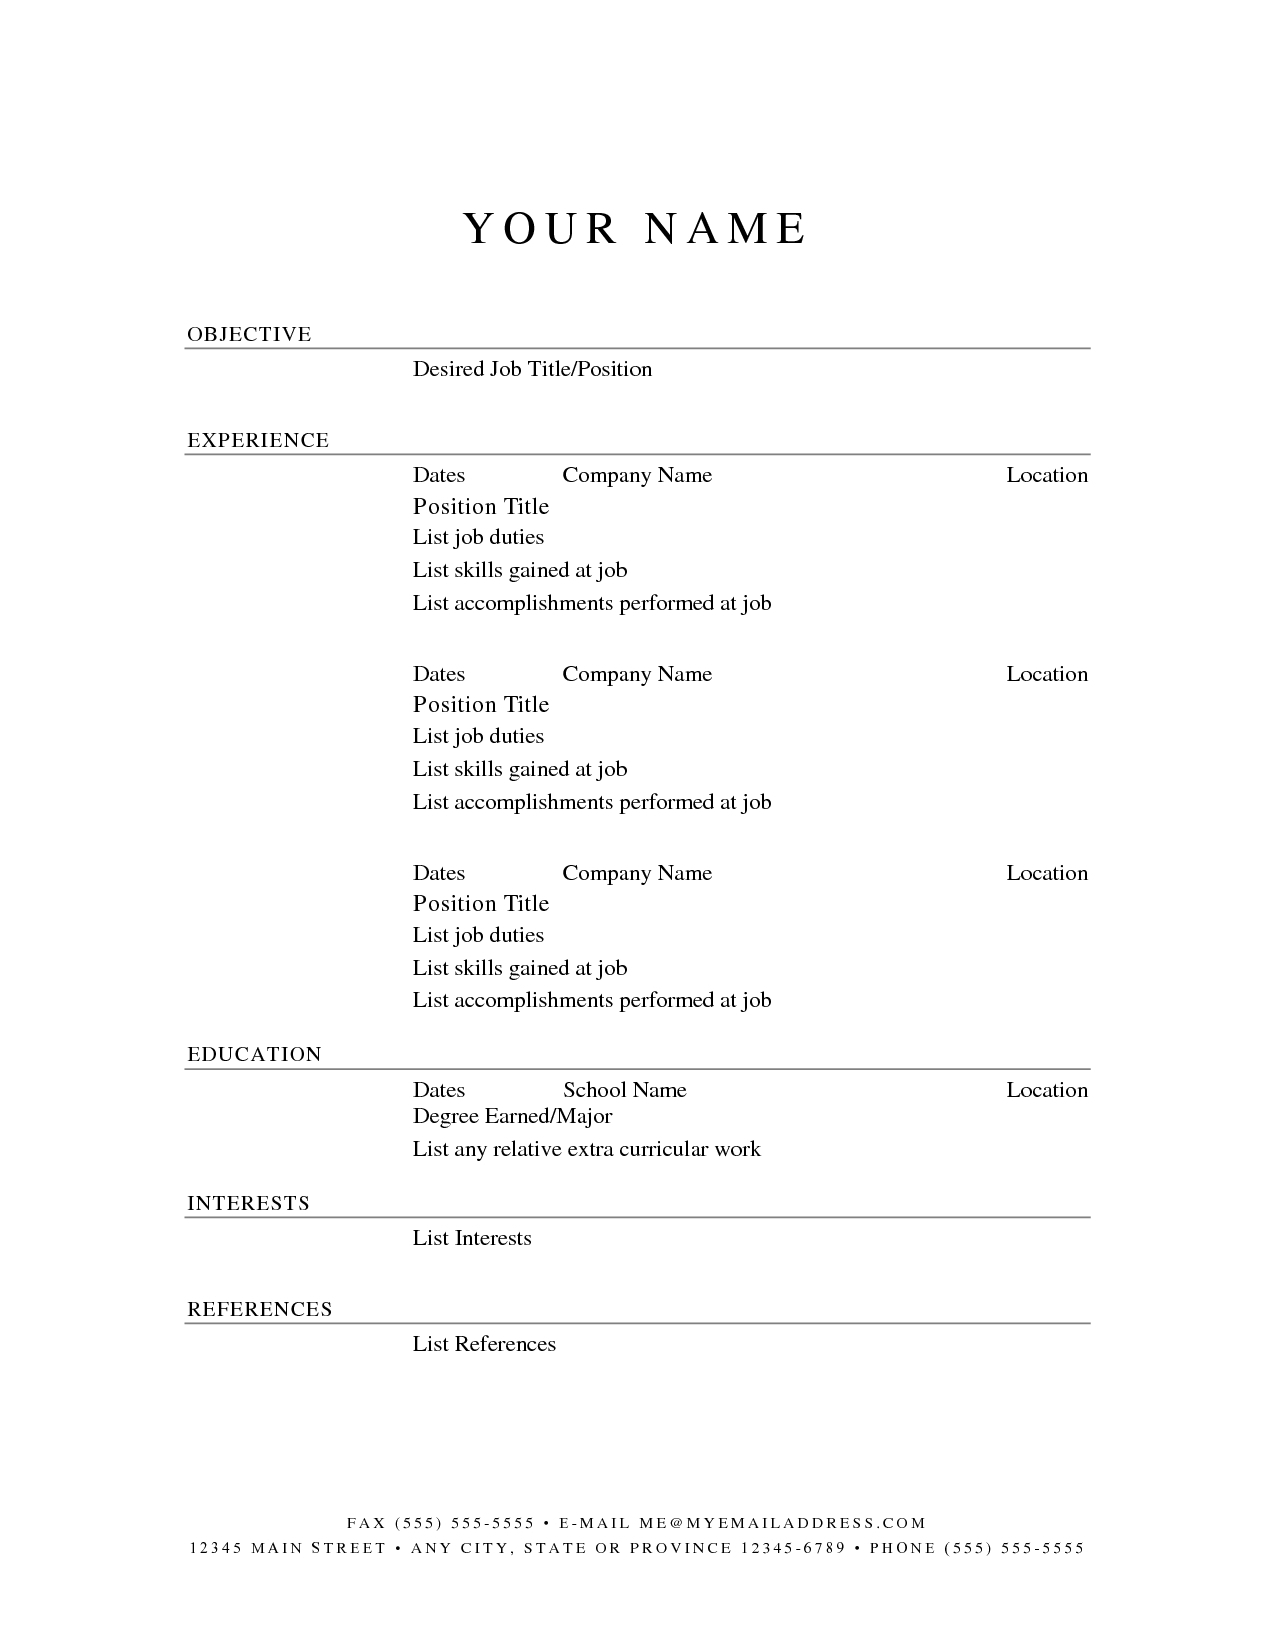 Blank Resume Templates For Microsoft Word – Atlantaauctionco With Regard To Free Blank Resume Templates For Microsoft Word